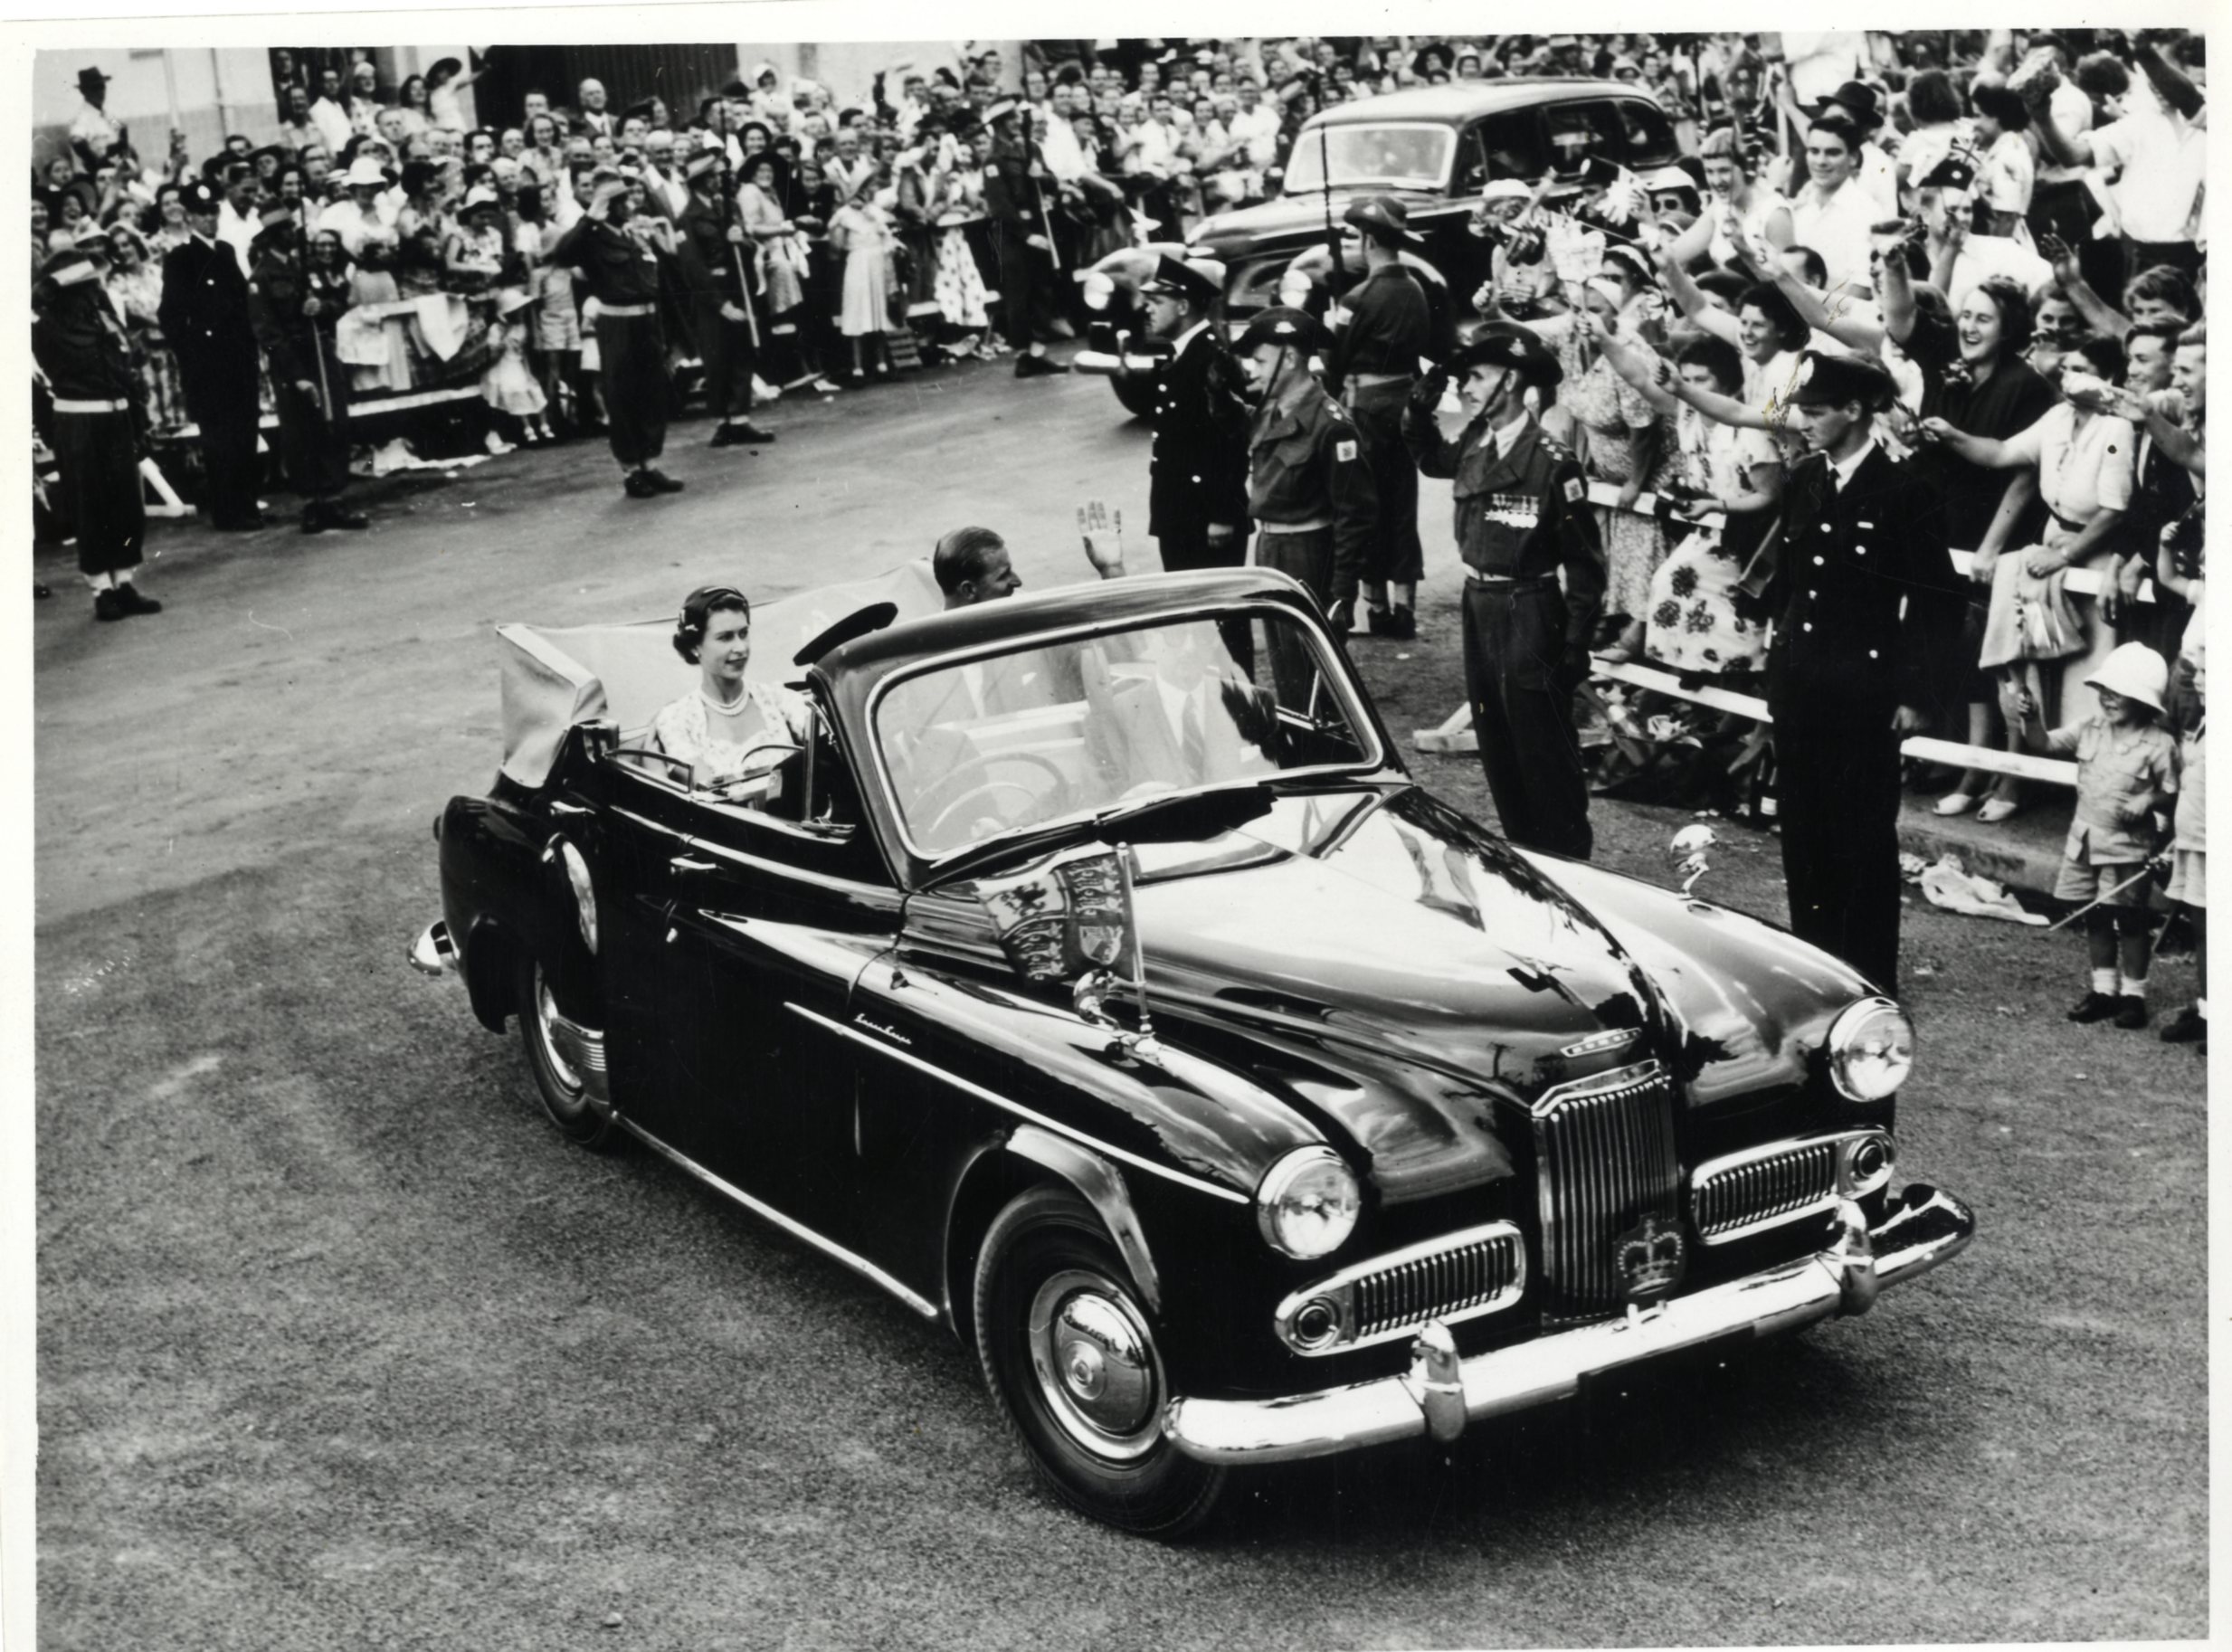 A black and white photograph of Queen Elizabeth II and the Duke of Edinburgh driving past crowds of people in an open-top Humber car